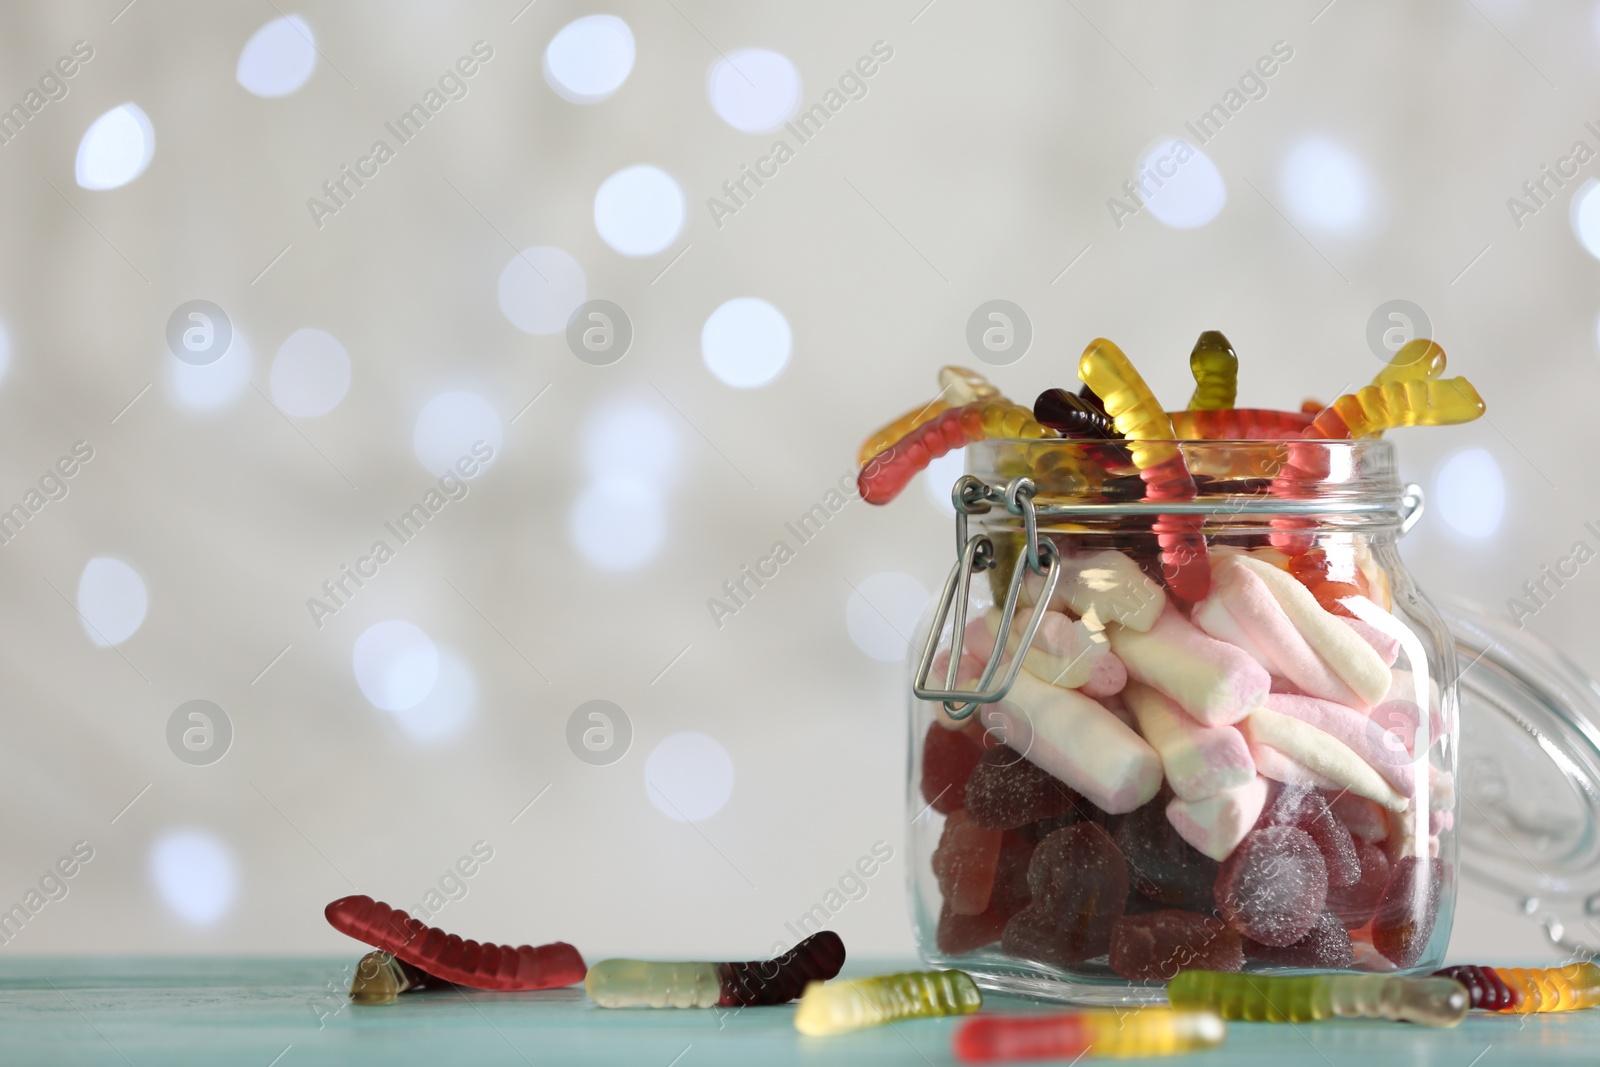 Photo of Delicious candies in jar on table against blurred background, closeup. Space for text